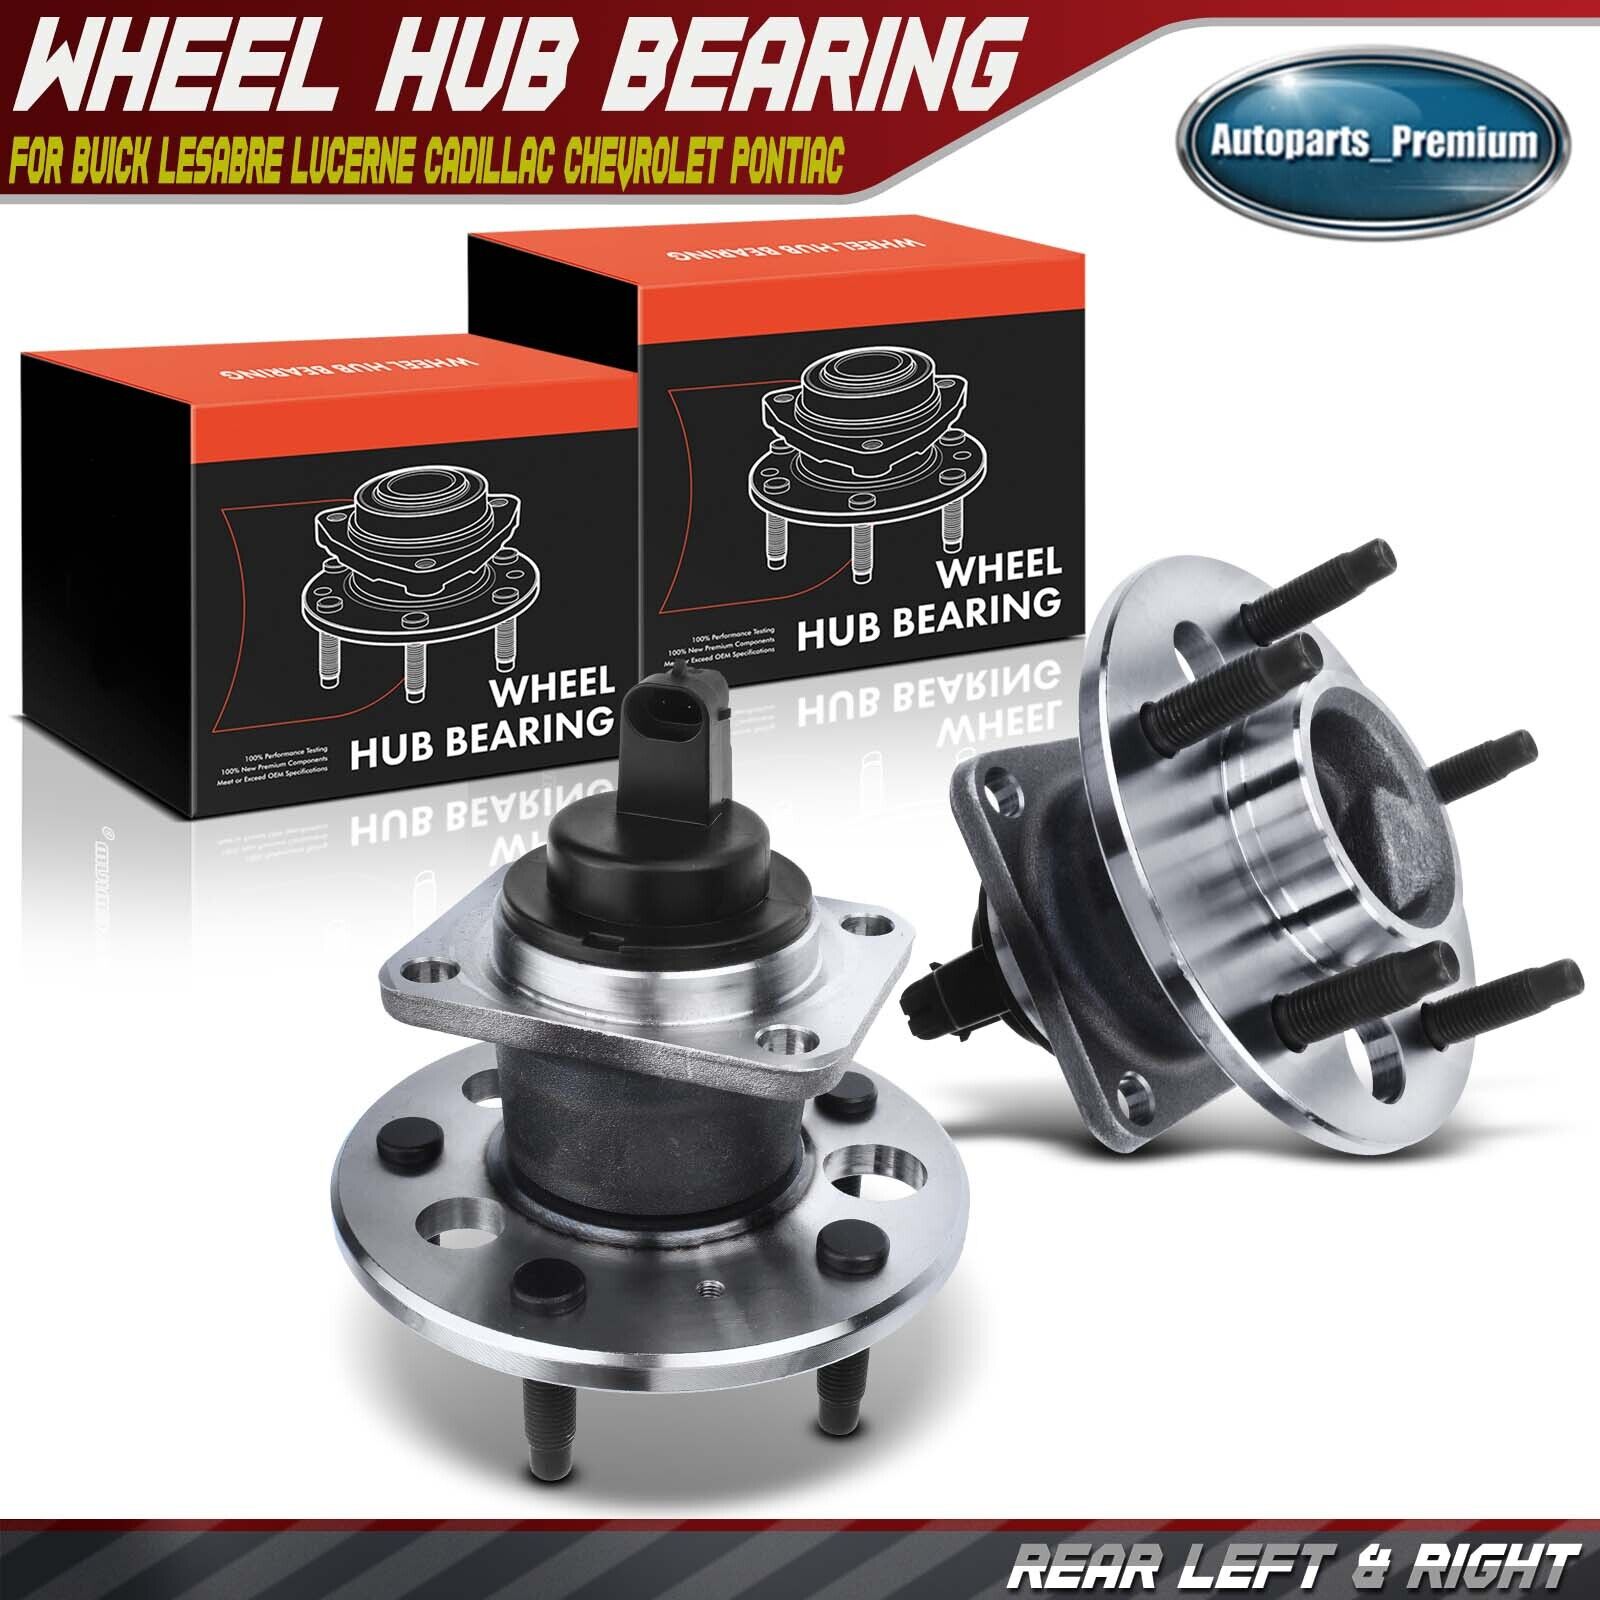 Rear L & R Wheel Bearing Hub Assembly for Buick Lucerne Lesabre Cadillac Deville